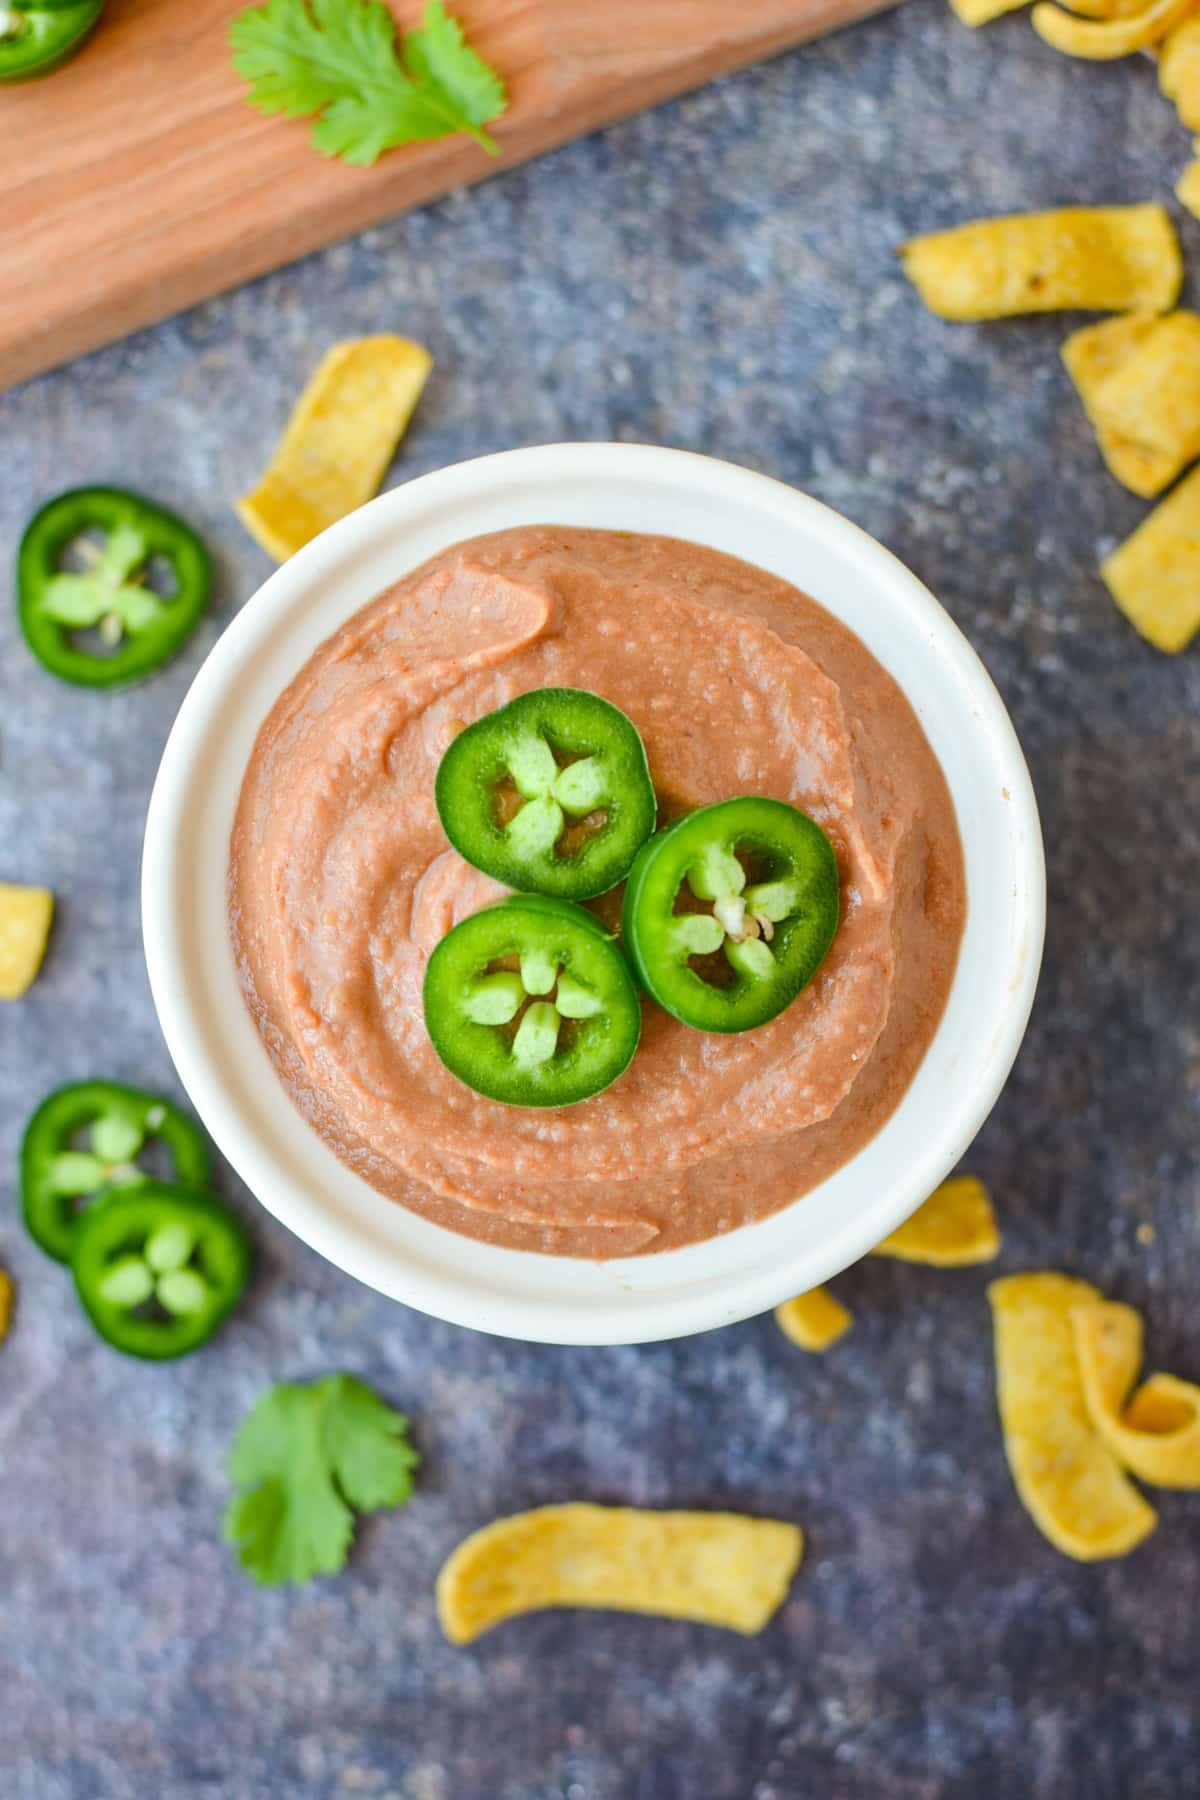 A bowl of bean dip garnished with jalapeno slices on top.